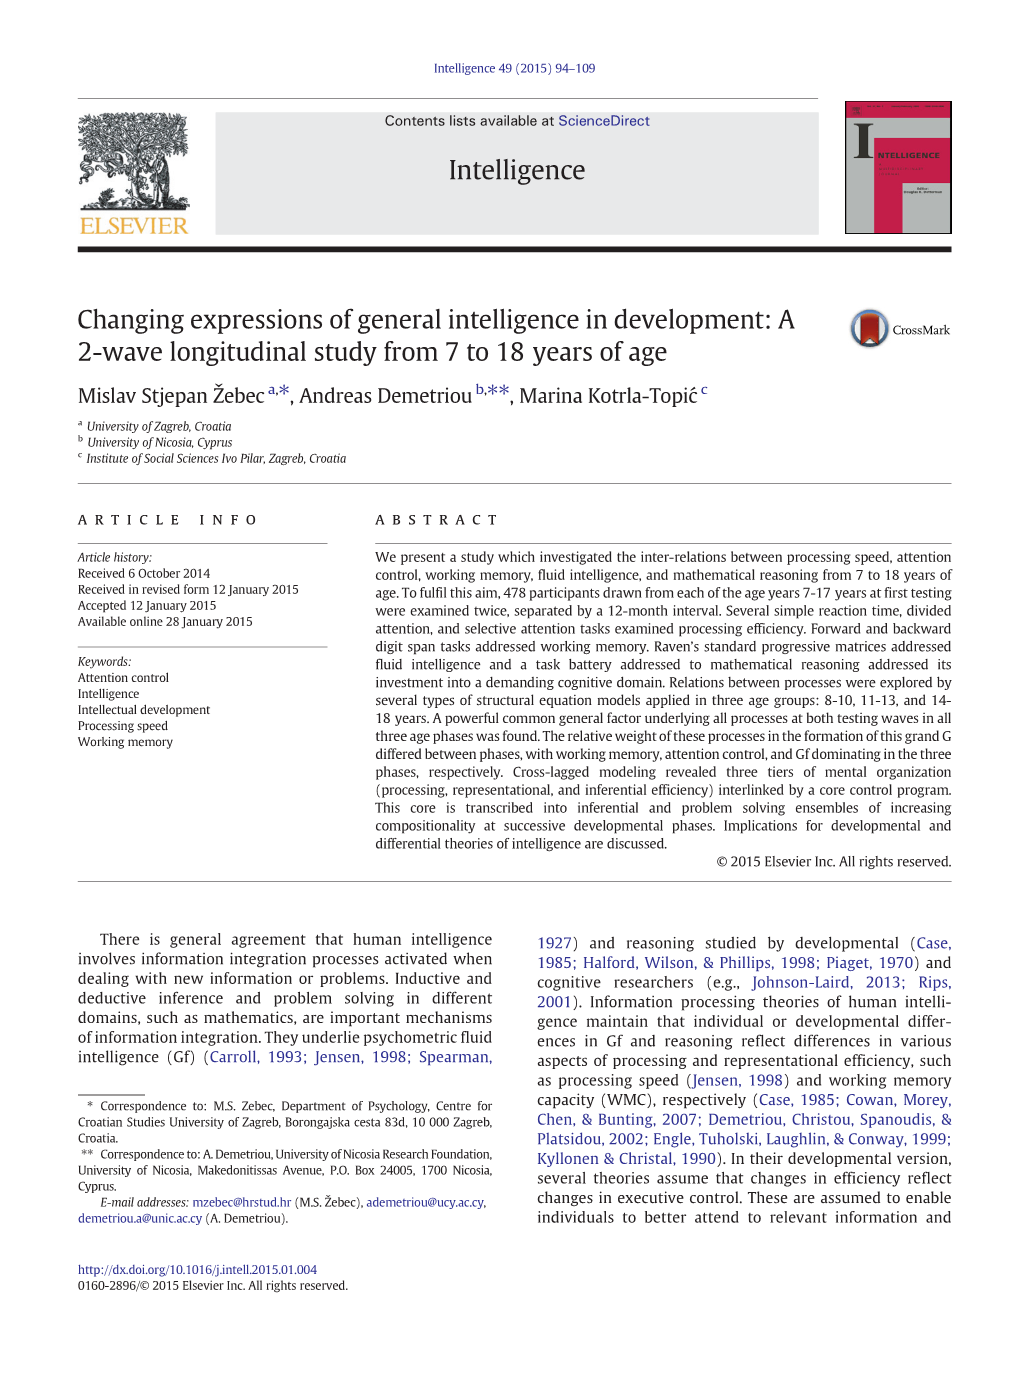 Changing Expressions of General Intelligence in Development: a 2-Wave Longitudinal Study from 7 to 18 Years of Age